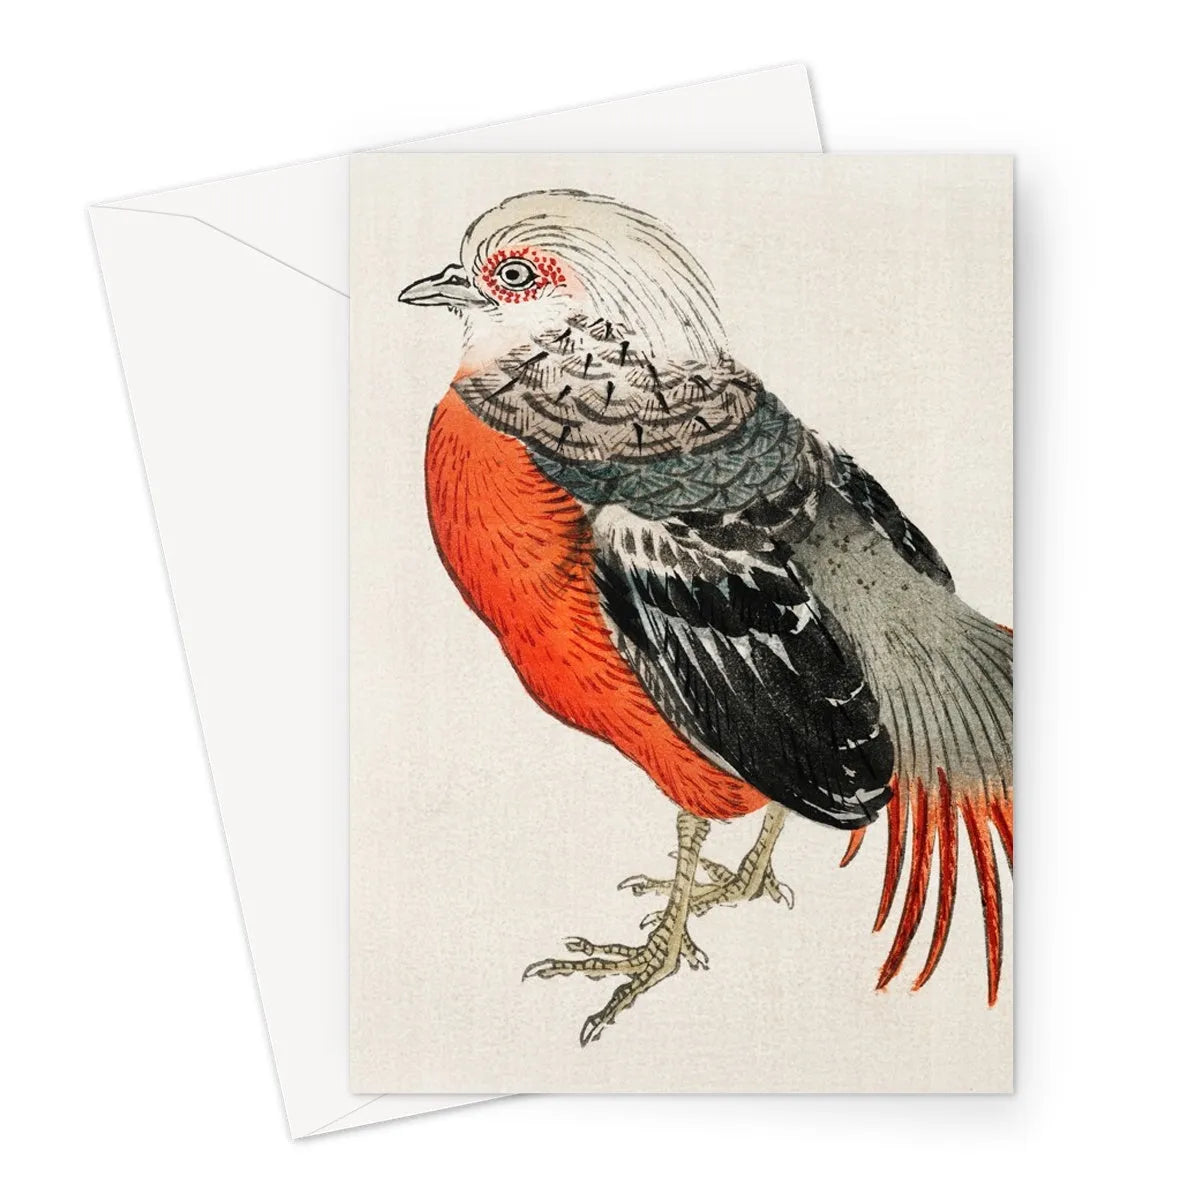 Japanese Pheasant By Kōno Bairei Greeting Card - A5 Portrait / 1 Card - Greeting & Note Cards - Aesthetic Art